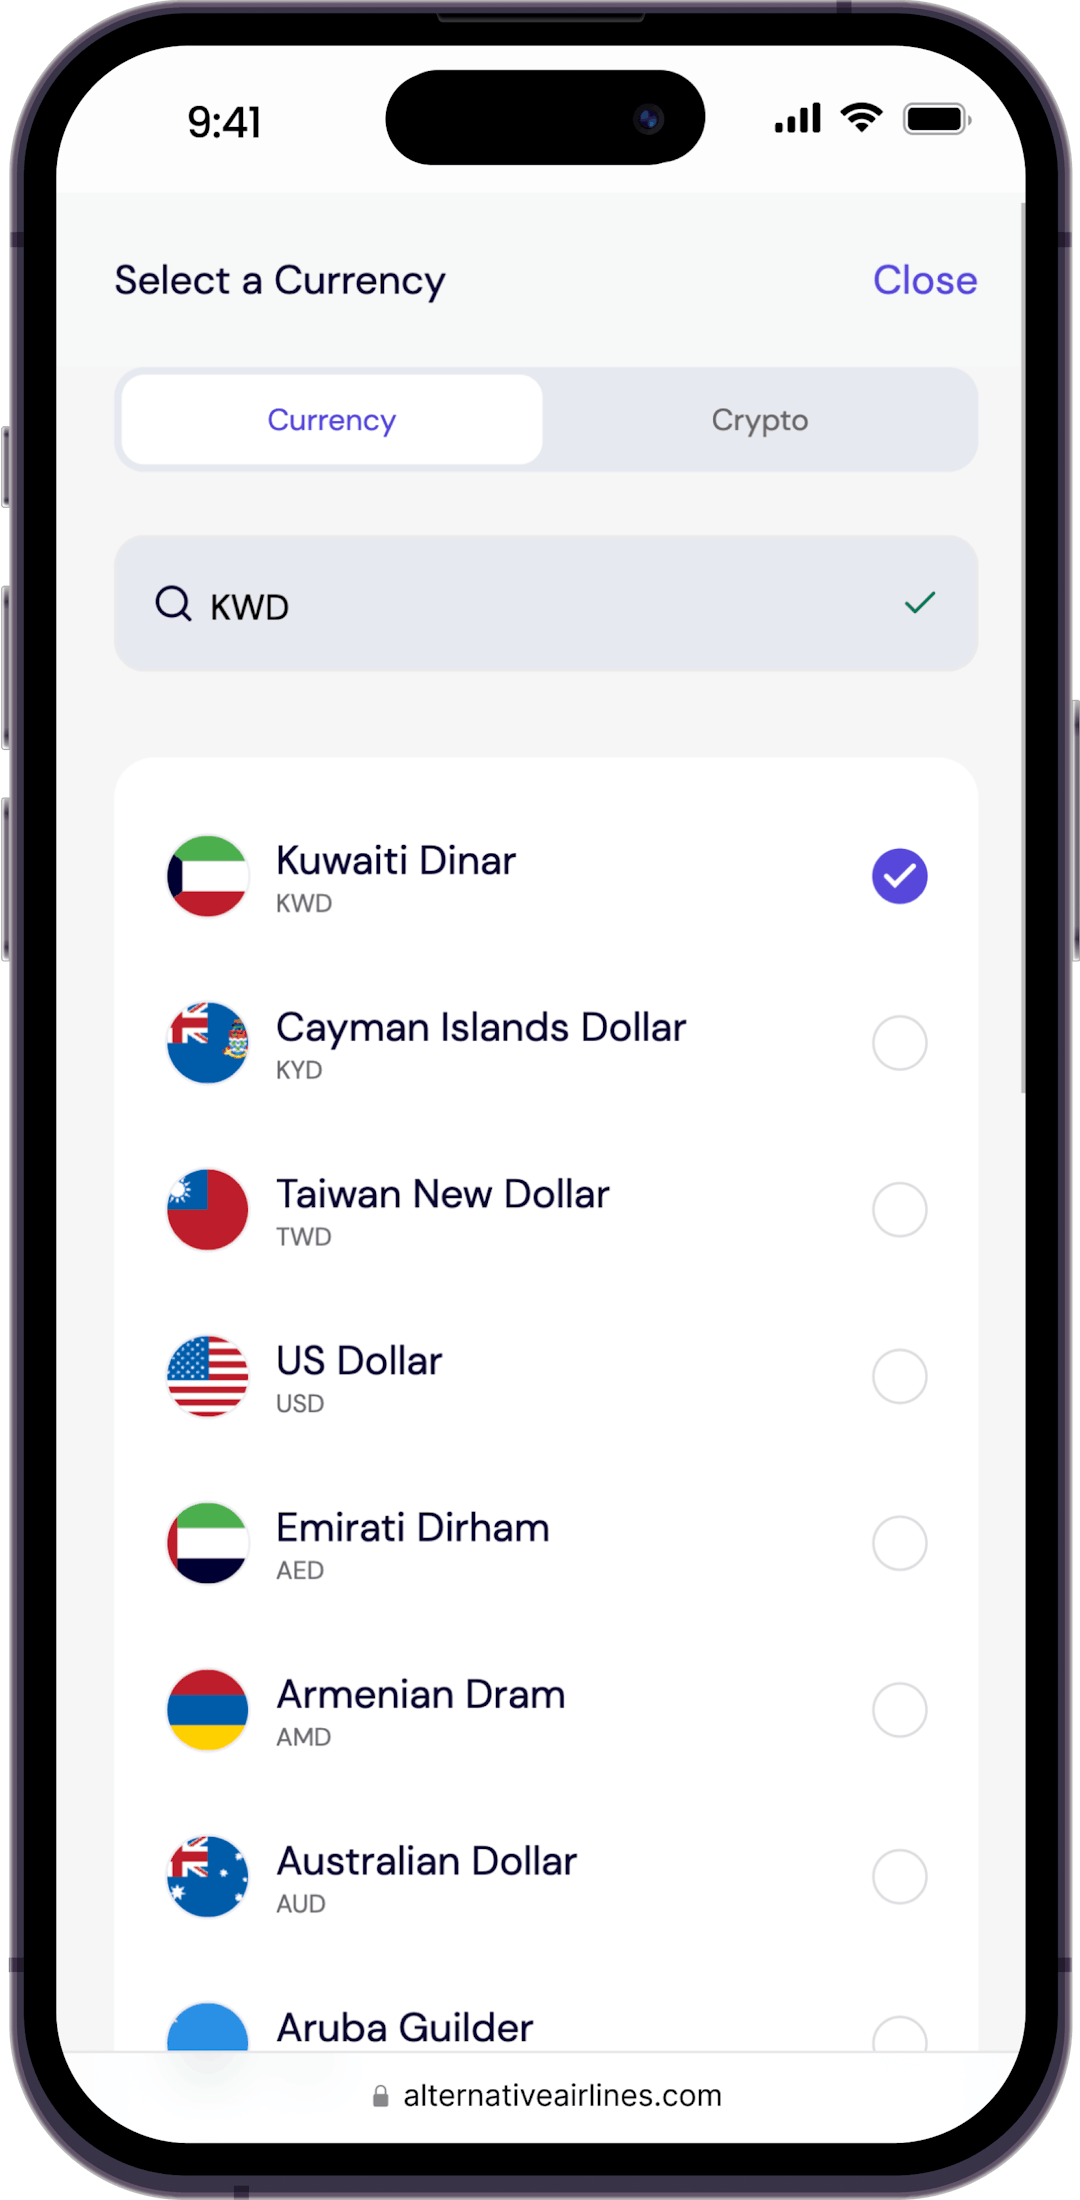 Step 3 - type 'KWD' to search for flights in Kuwaiti Dinar